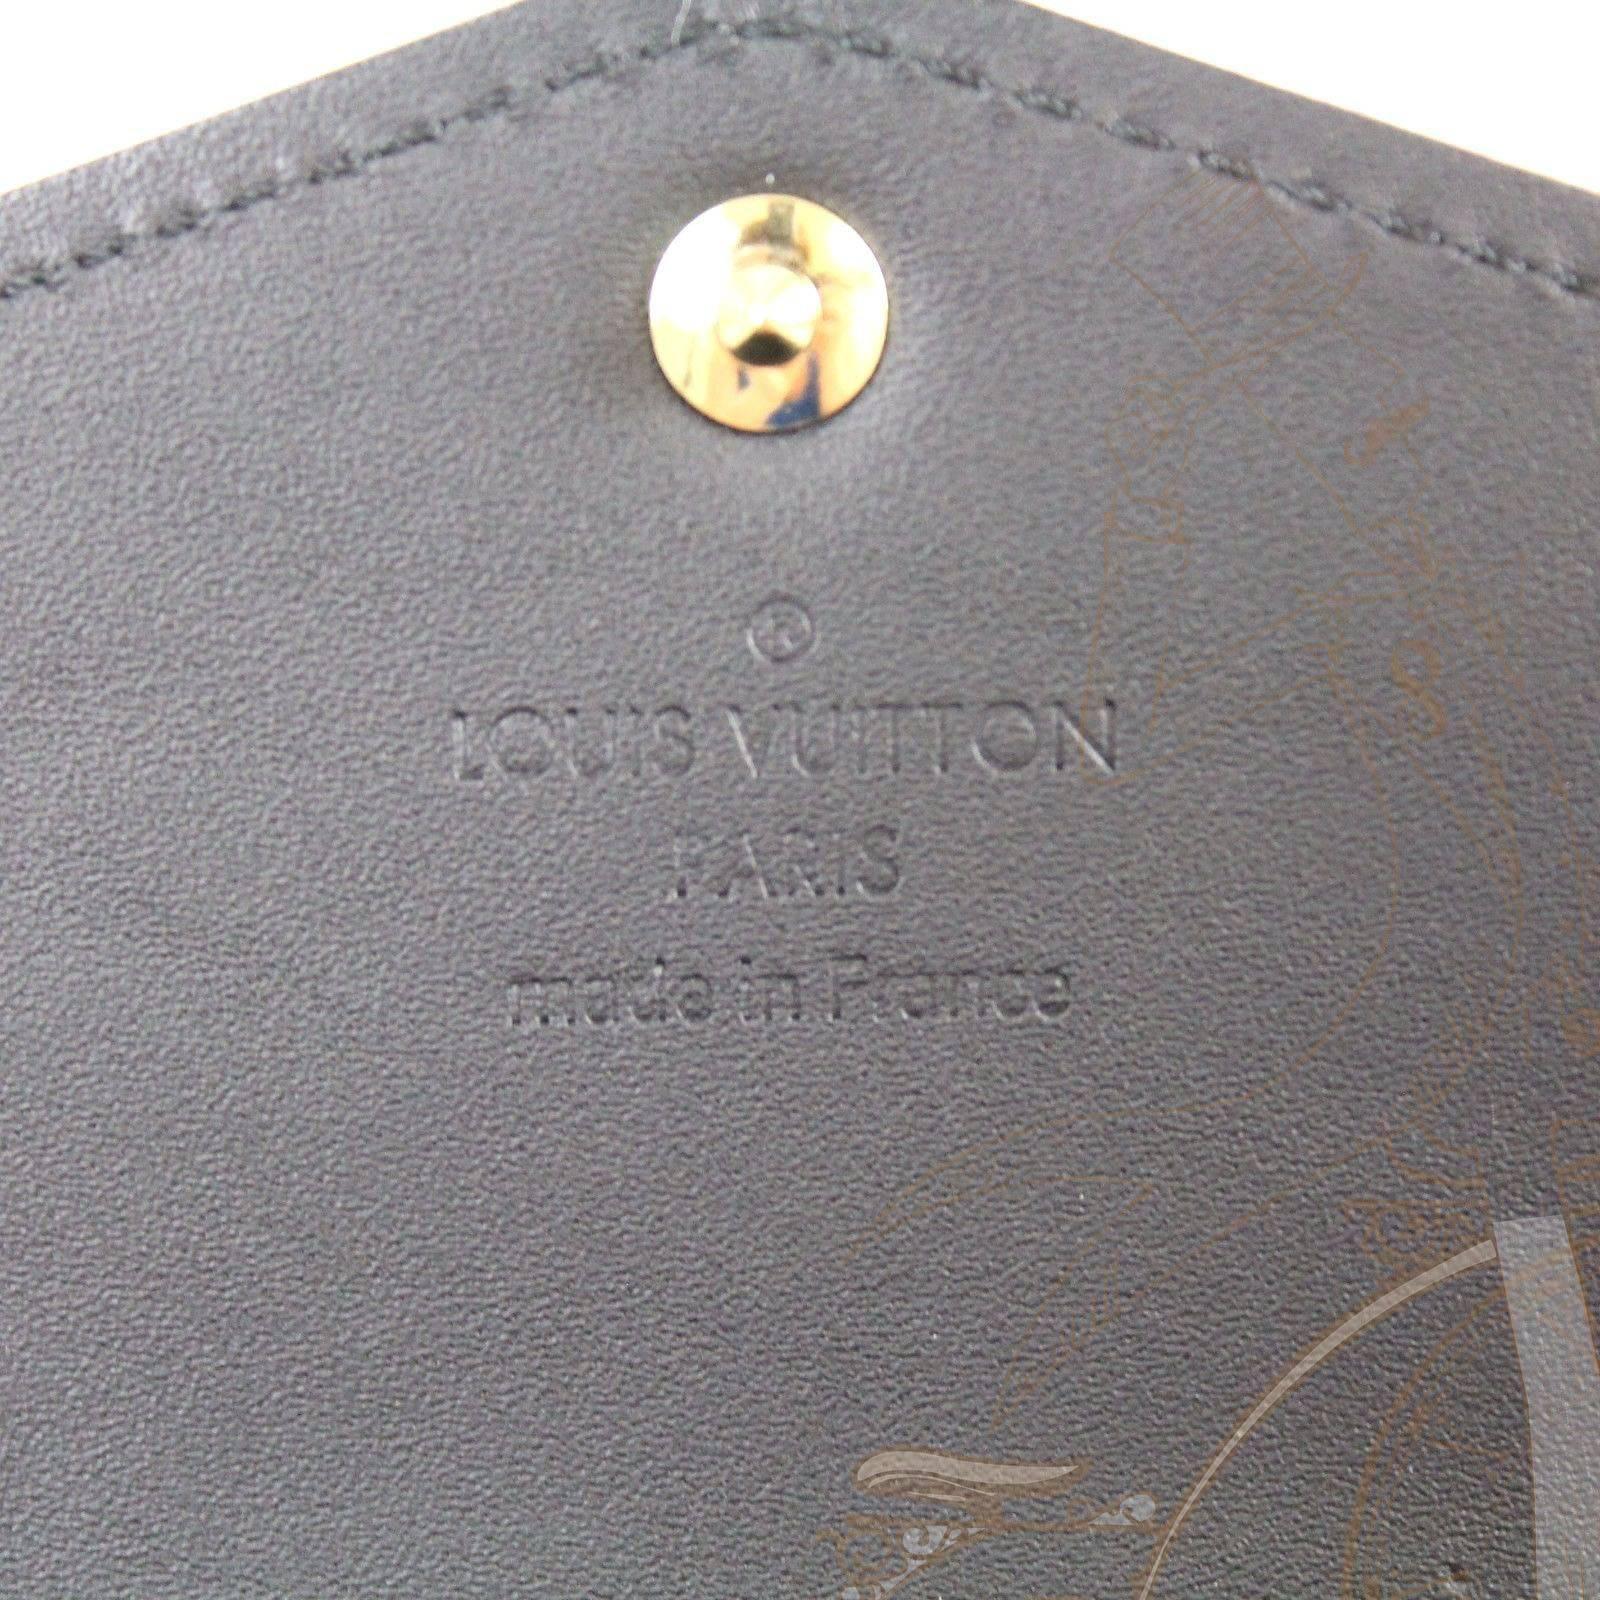 Louis Vuitton Monogram Patent Leather Icon Cars Stickers Limited Edition Wallet In New Condition For Sale In Miami, FL